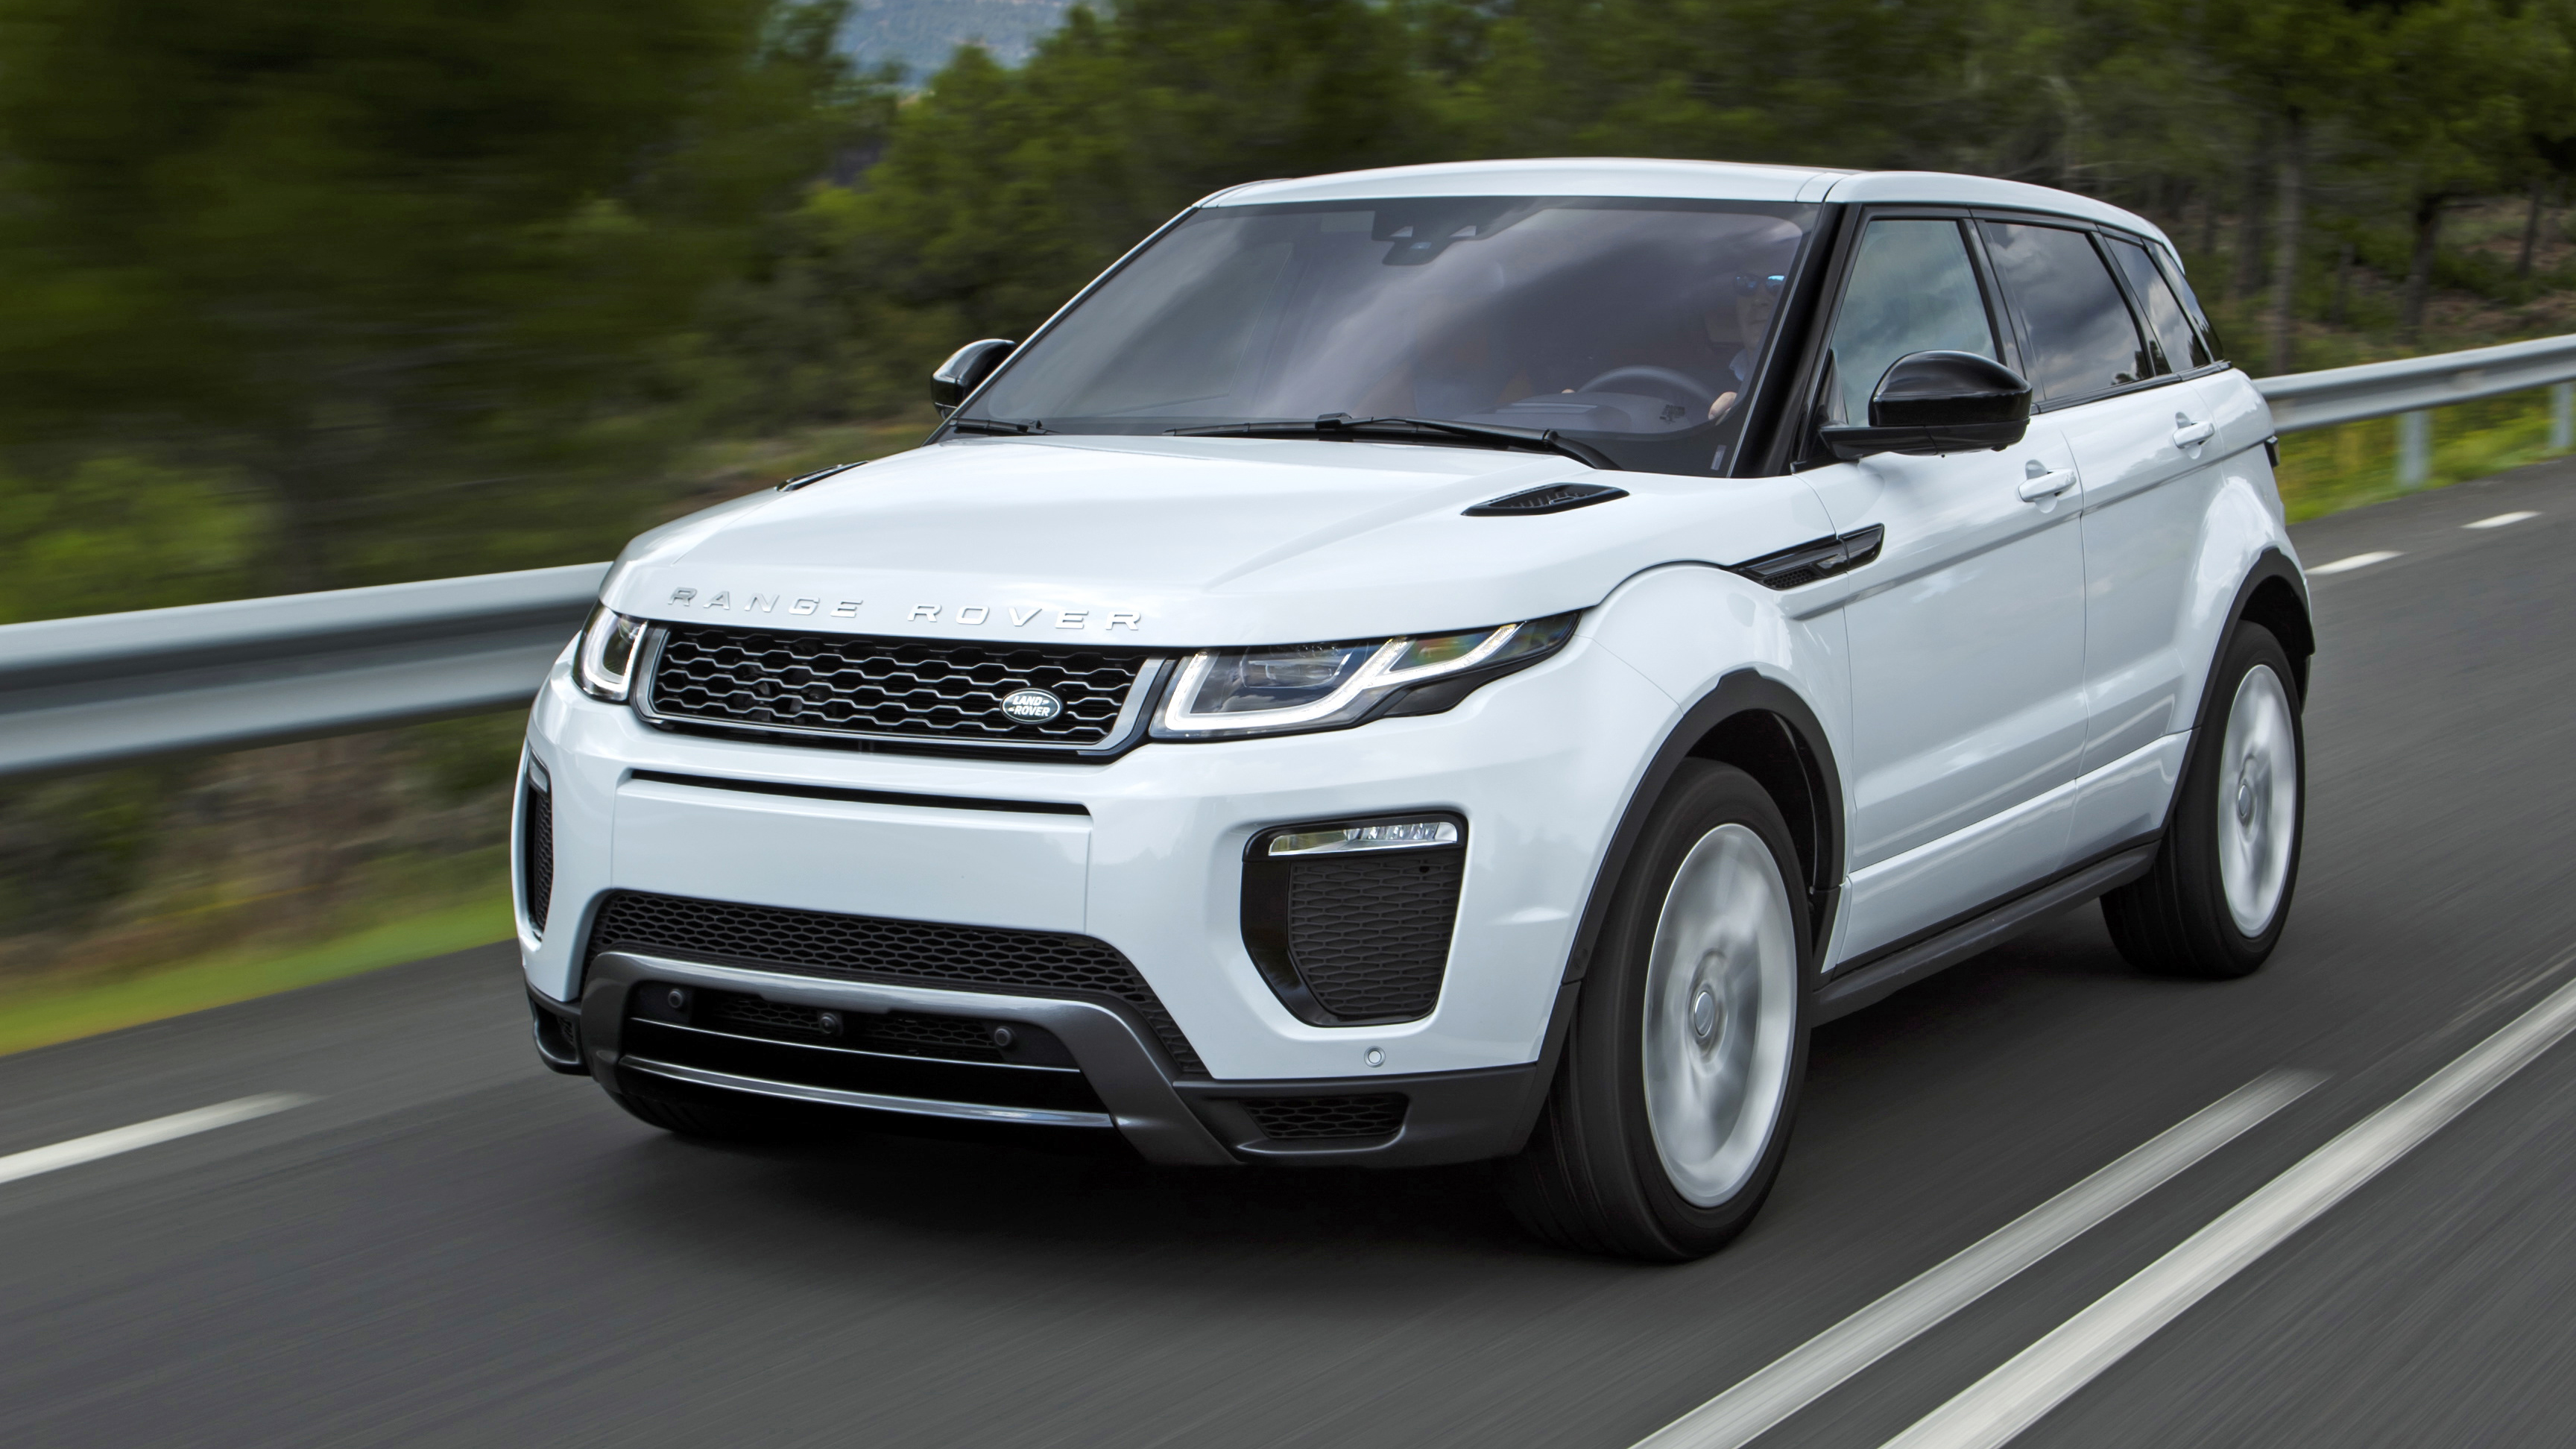 First drive: new 2016 Range Rover Evoque 'Ingenium' Reviews 2023 | Top Gear